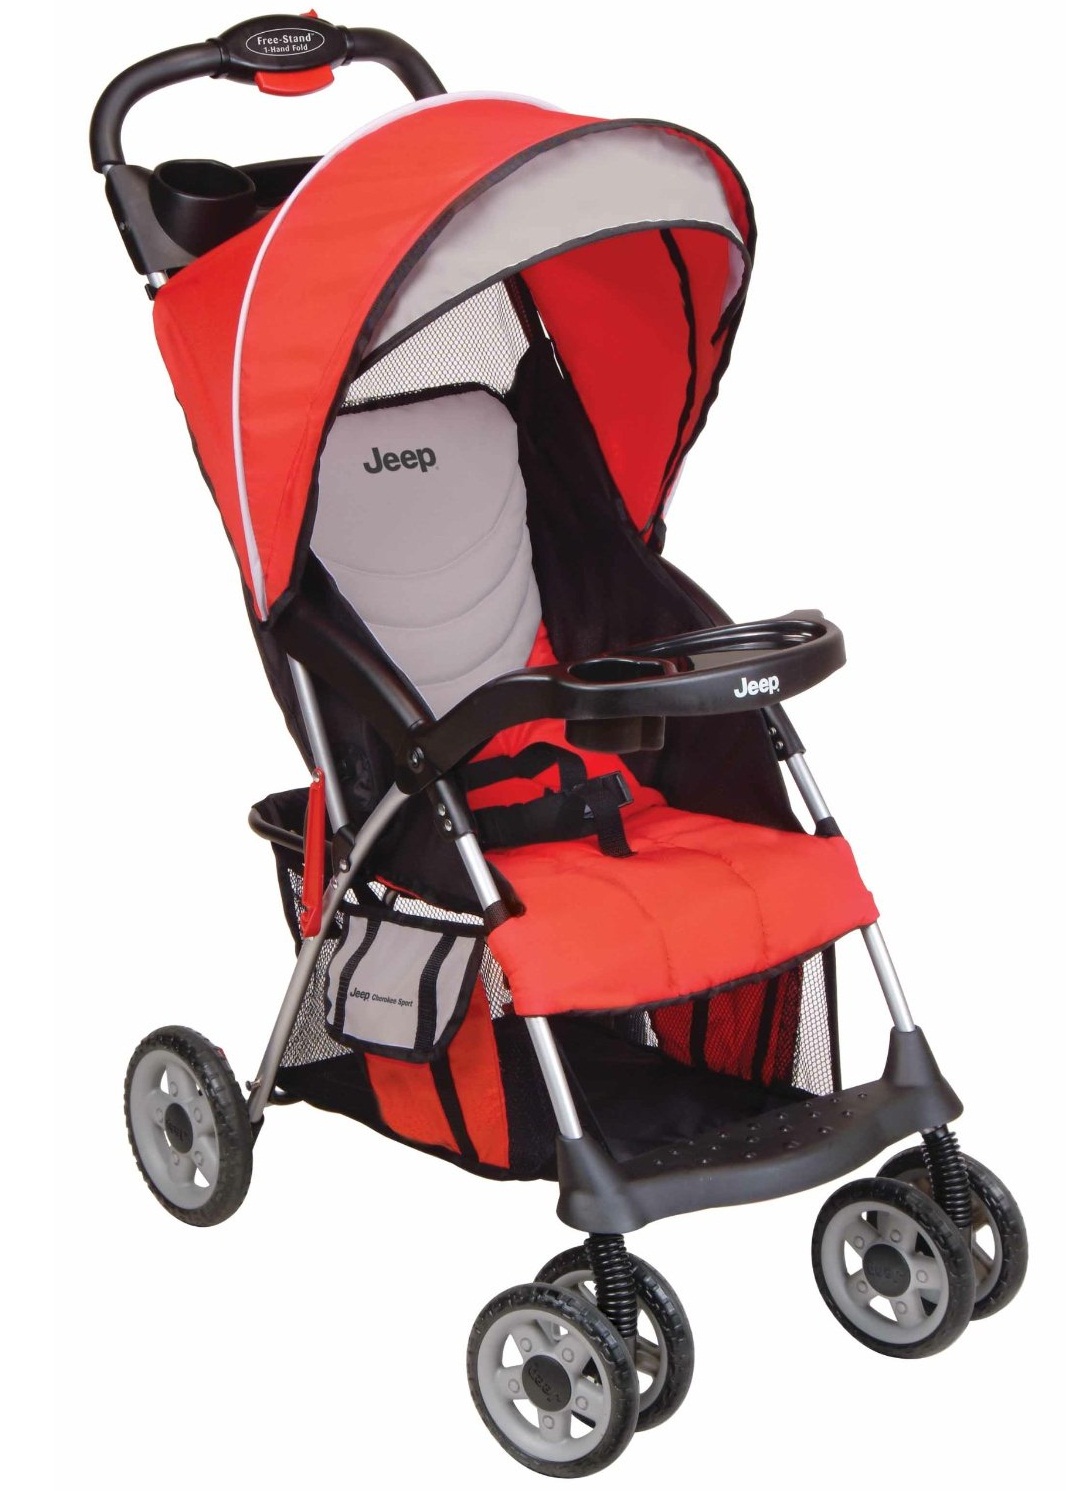 Review of Jeep Cherokee Sport Stroller